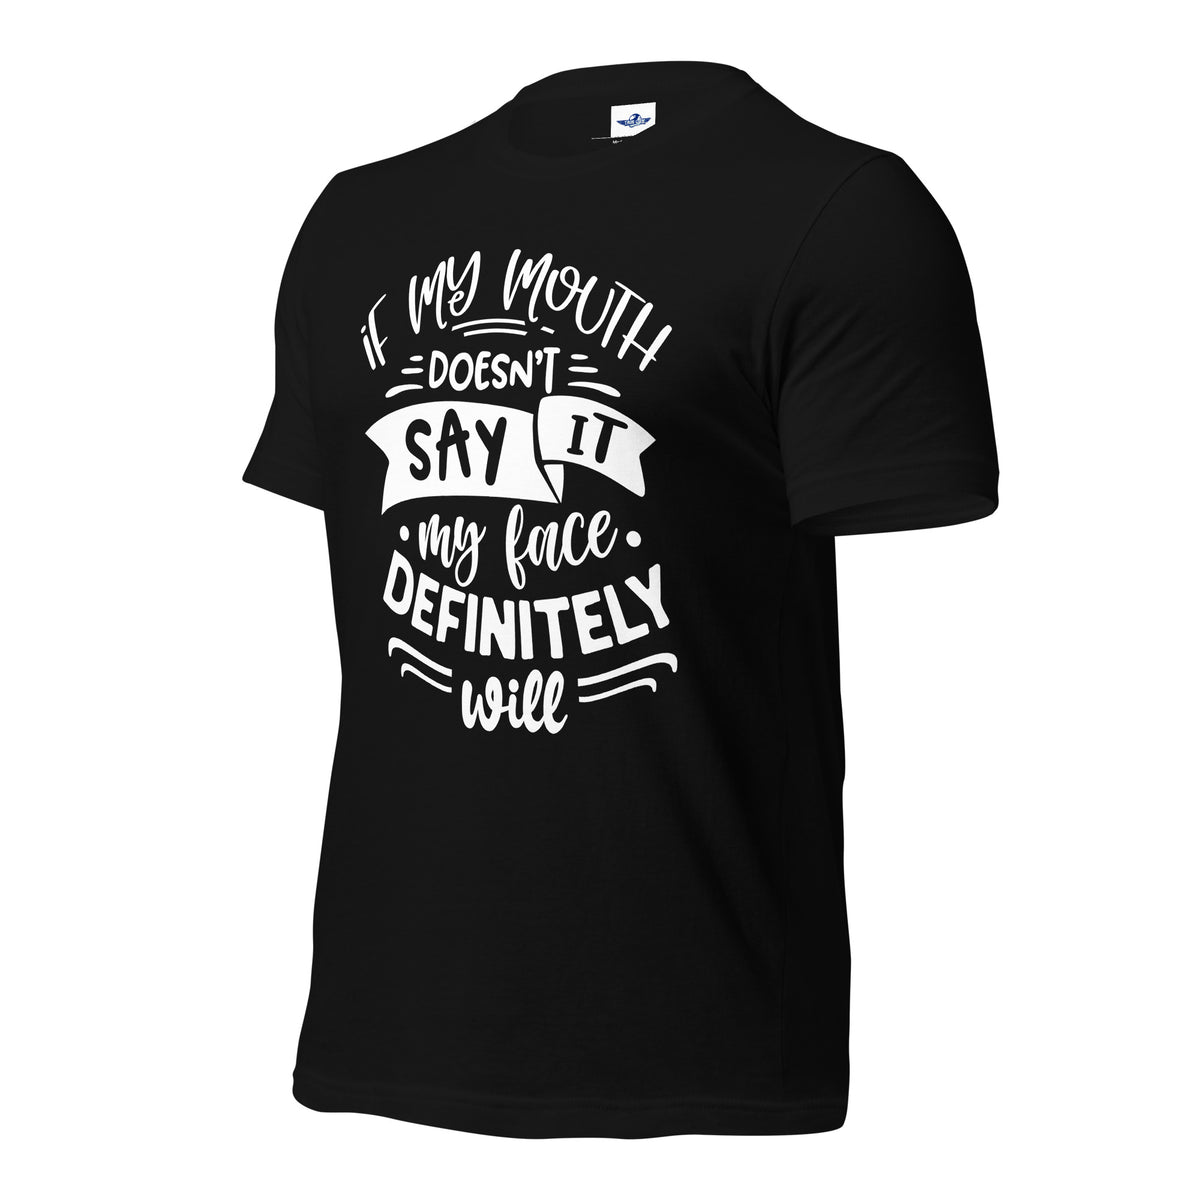 If My Mouth Doesn't Say It Men T-Shirt